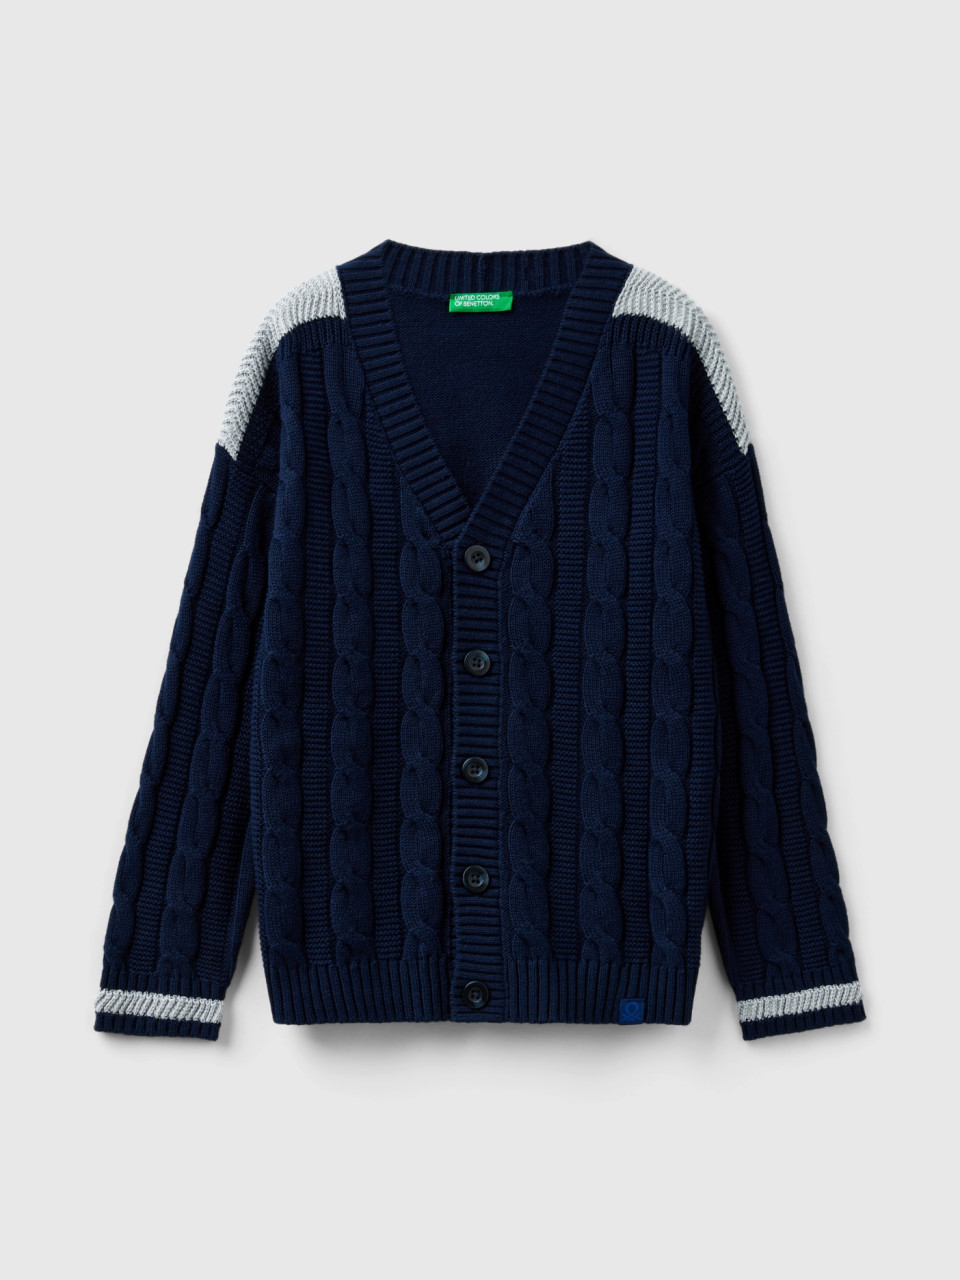 Benetton, Cardigan With Cables In Tricot Cotton, Dark Blue, Kids